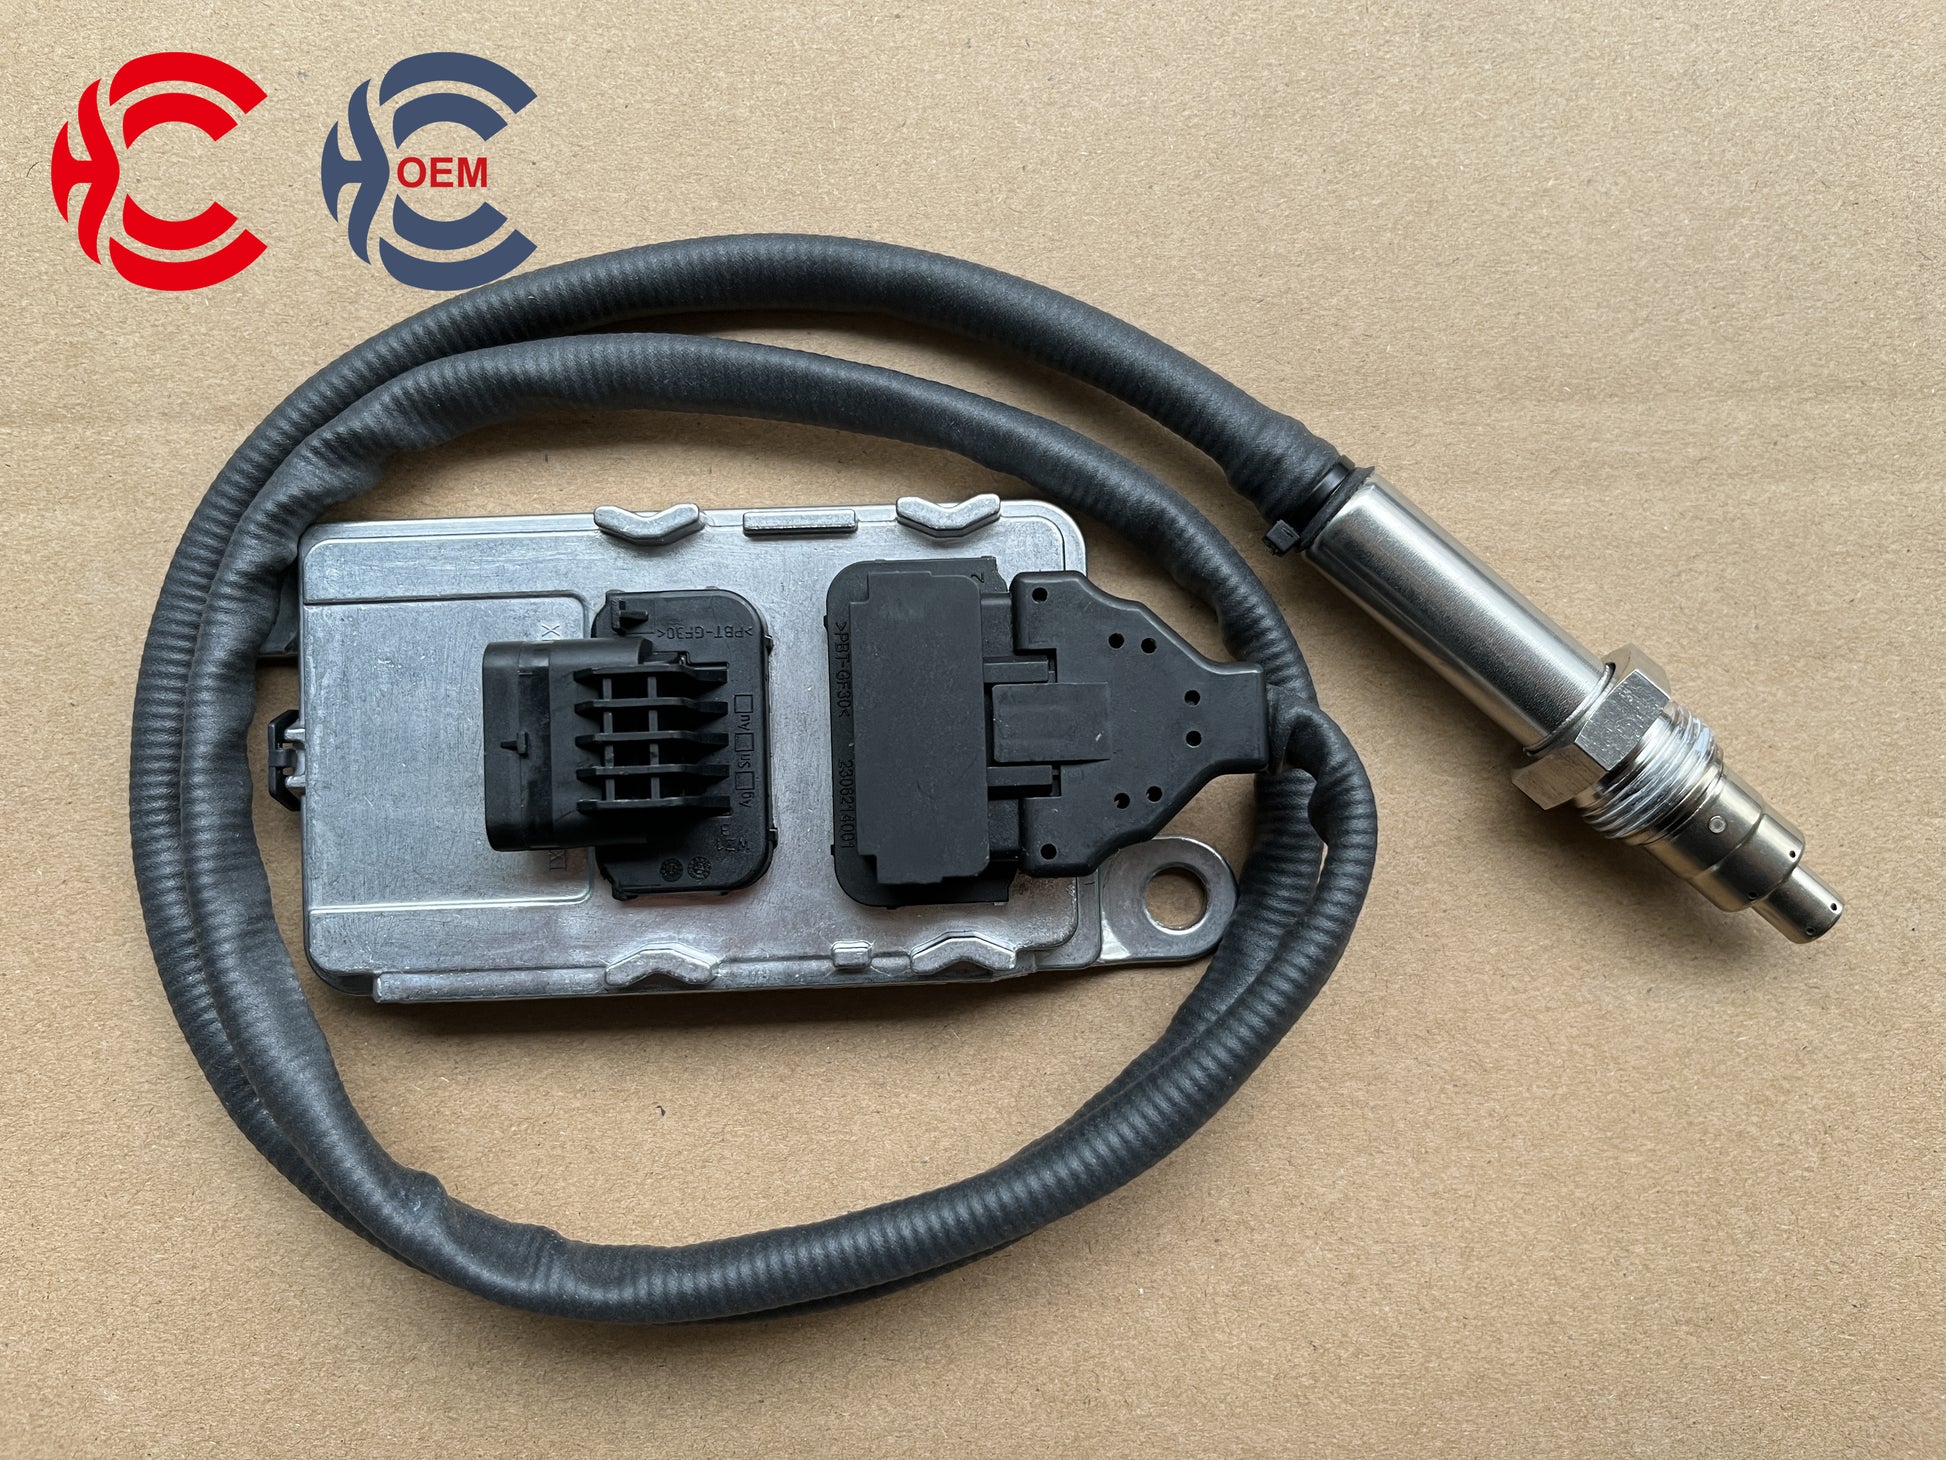 OEM: SNS 3543 612640130013 Gen3.5Material: ABS metalColor: black silverOrigin: Made in ChinaWeight: 400gPacking List: 1* Nitrogen oxide sensor NOx More ServiceWe can provide OEM Manufacturing serviceWe can Be your one-step solution for Auto PartsWe can provide technical scheme for you Feel Free to Contact Us, We will get back to you as soon as possible.